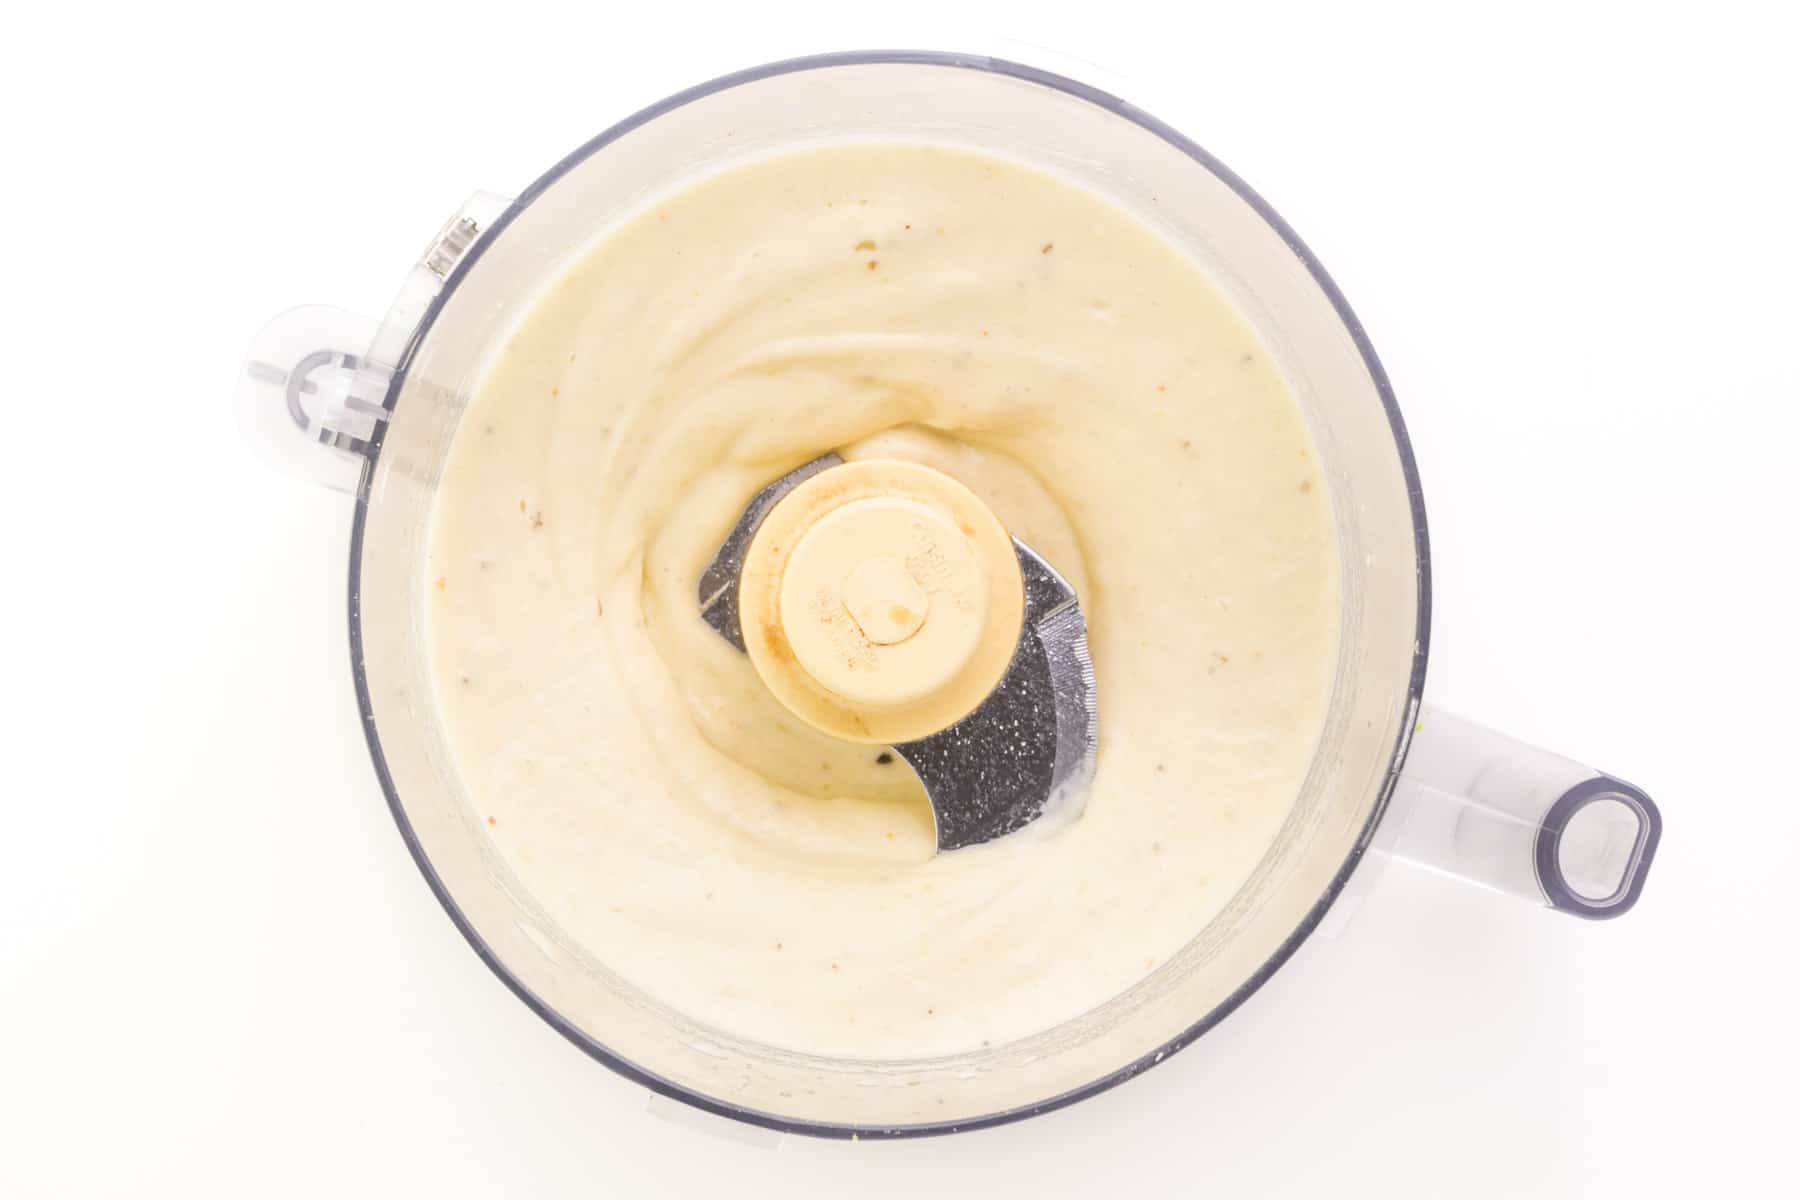 A creamy frozen banana mixture is in the bottom of a food processor bowl.